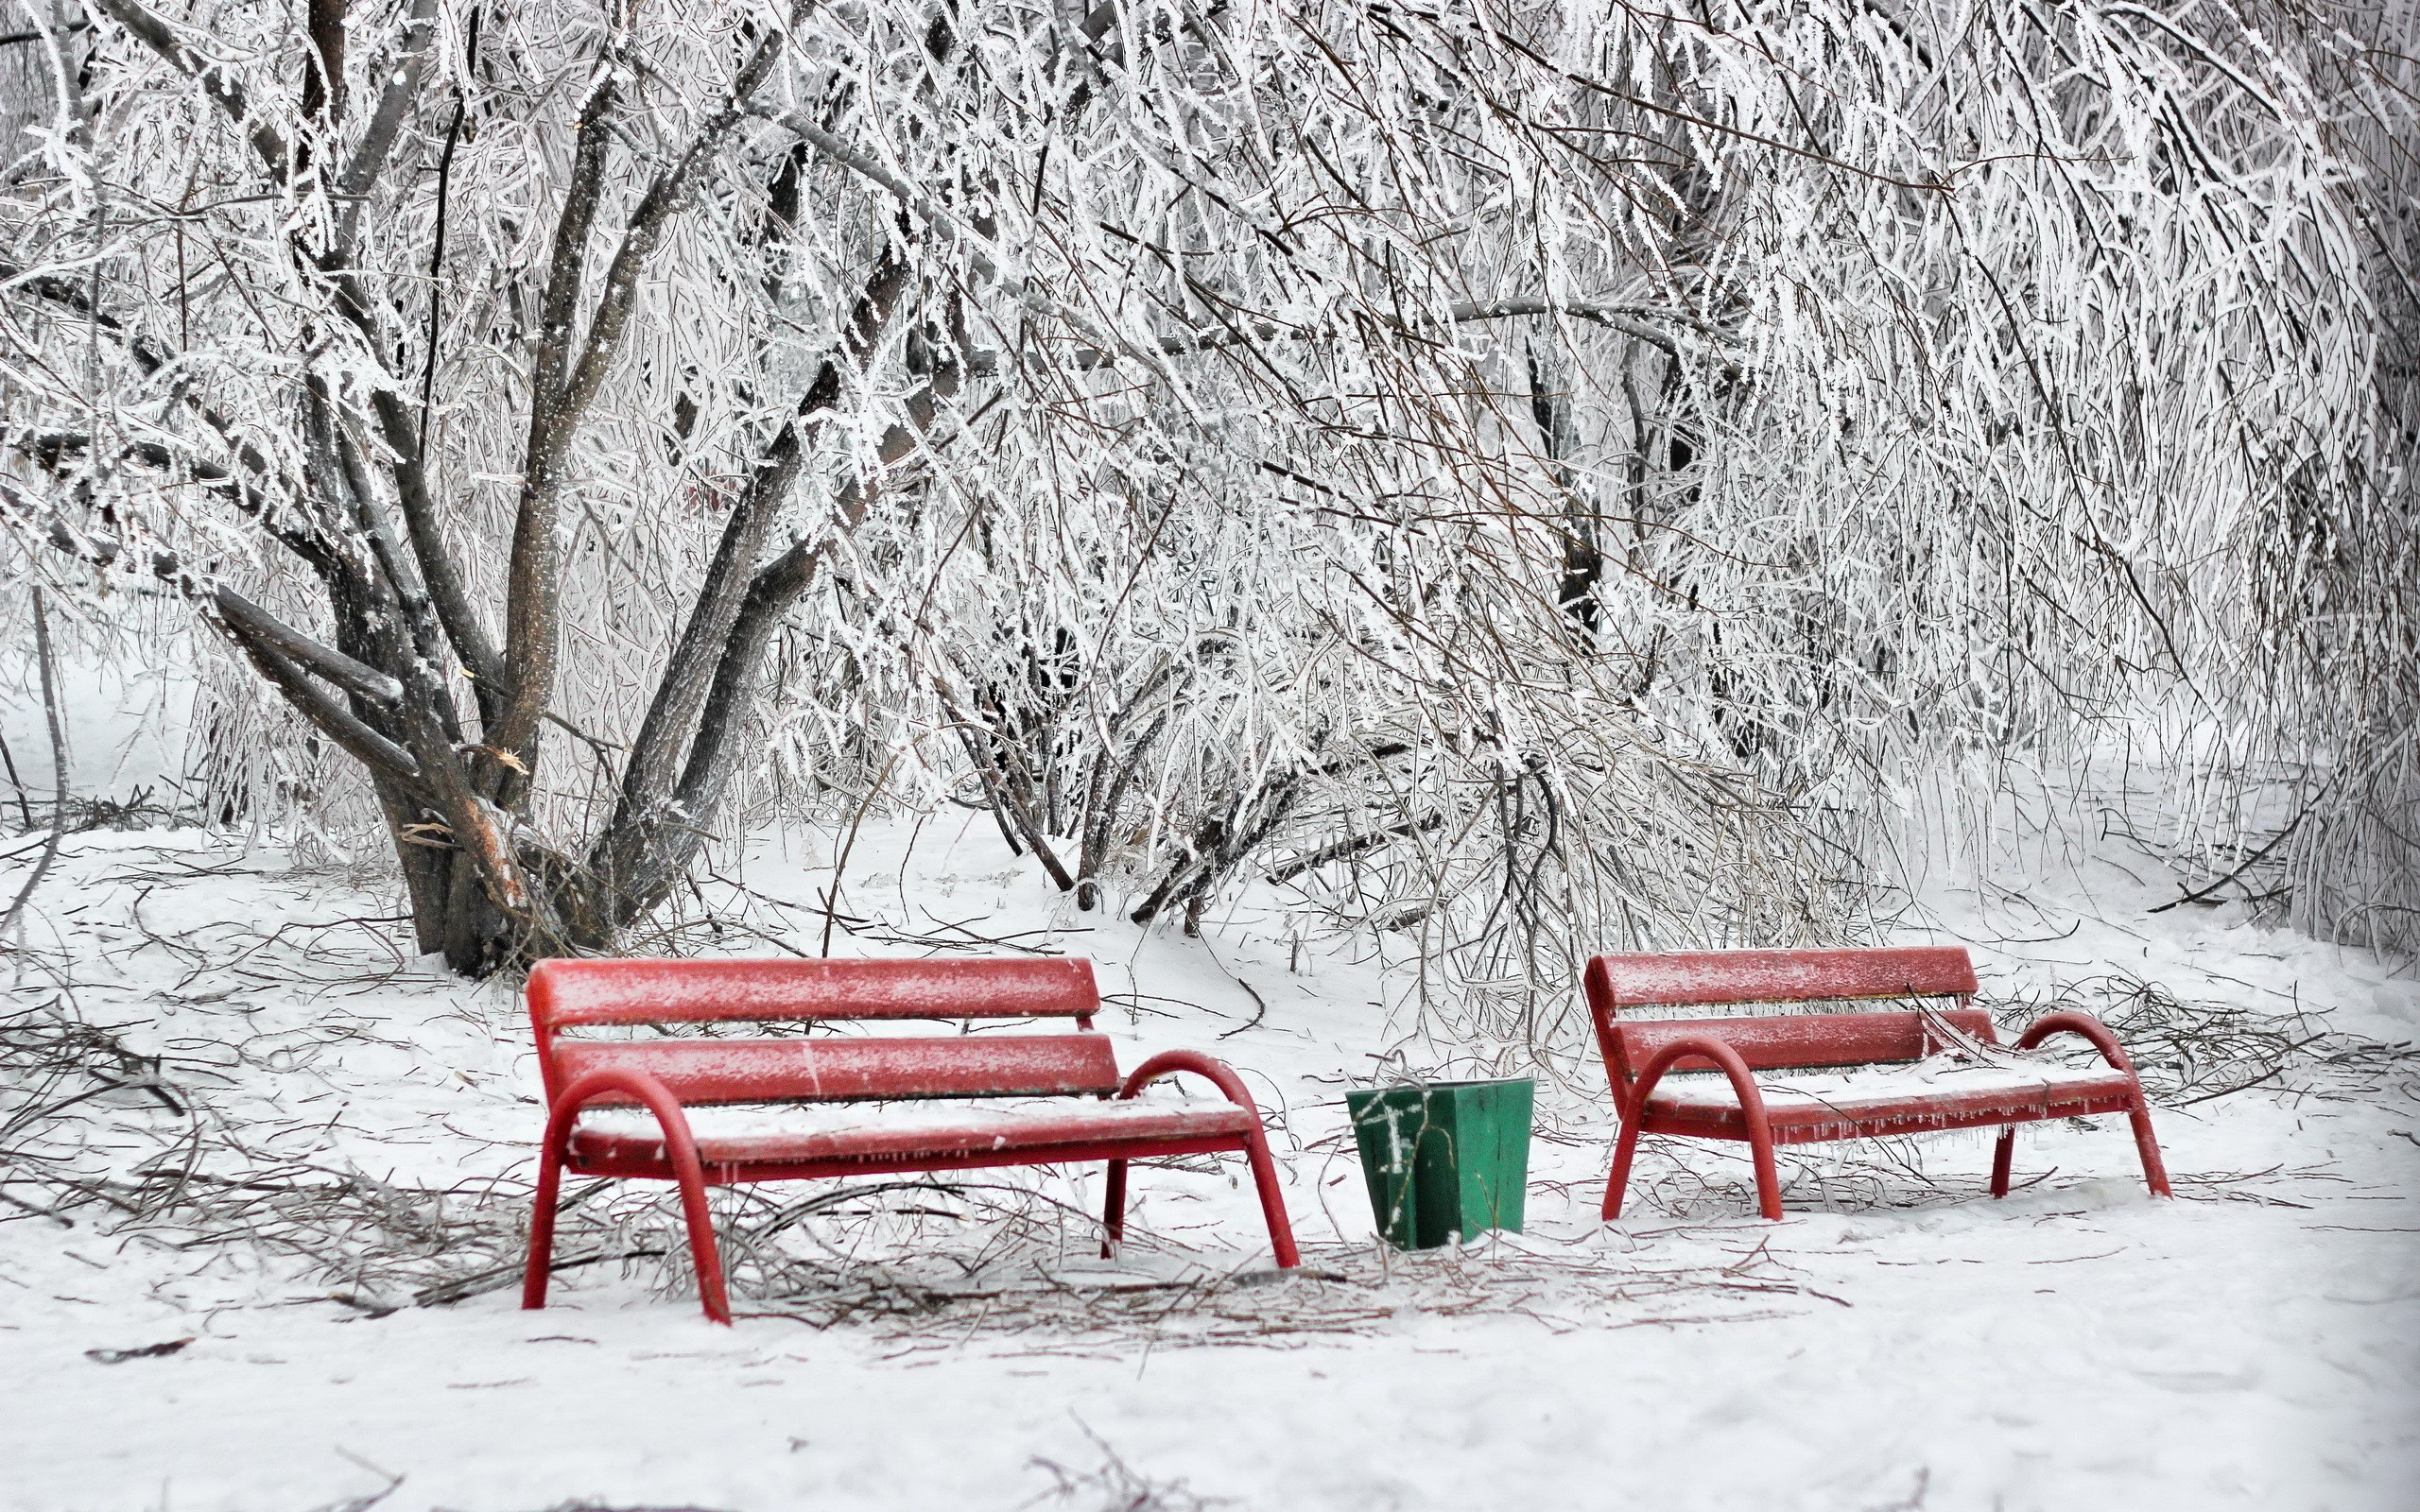 Winter: Winter Peaceful Time Tree Red Benches Splendor Nature Trees ...